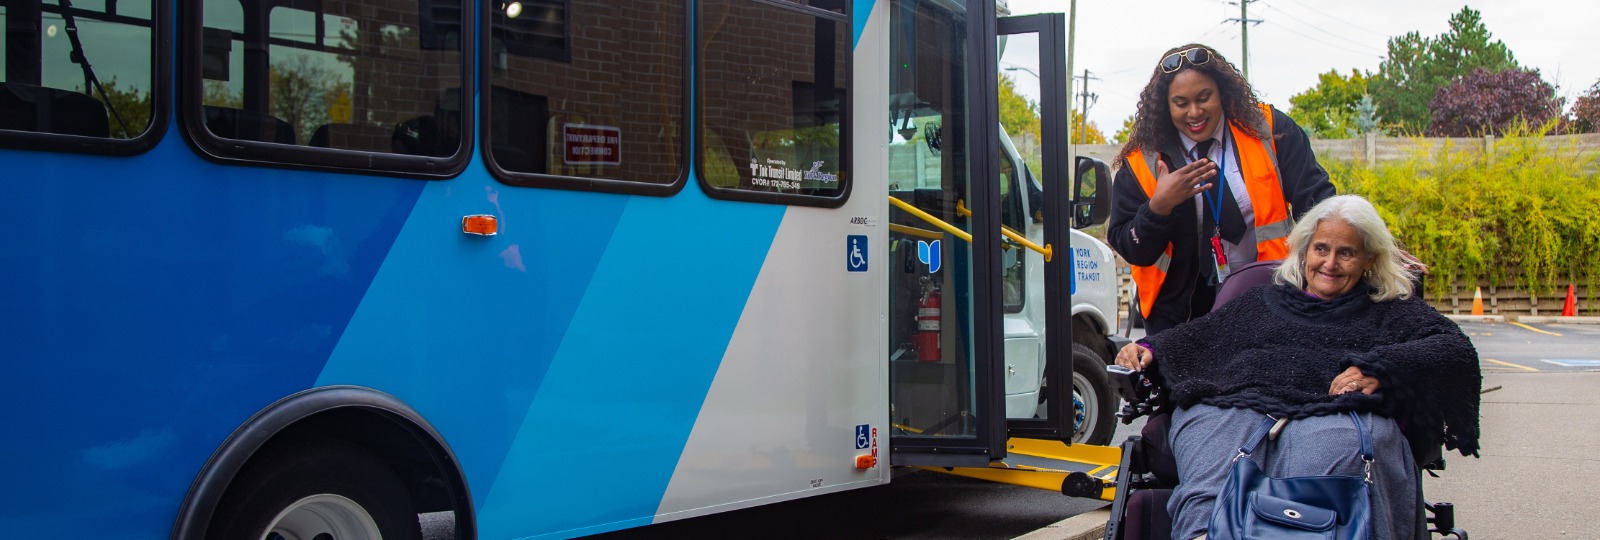 image of YRT driver assisting elderly woman in a mobility device and a man boarding a white vehicle